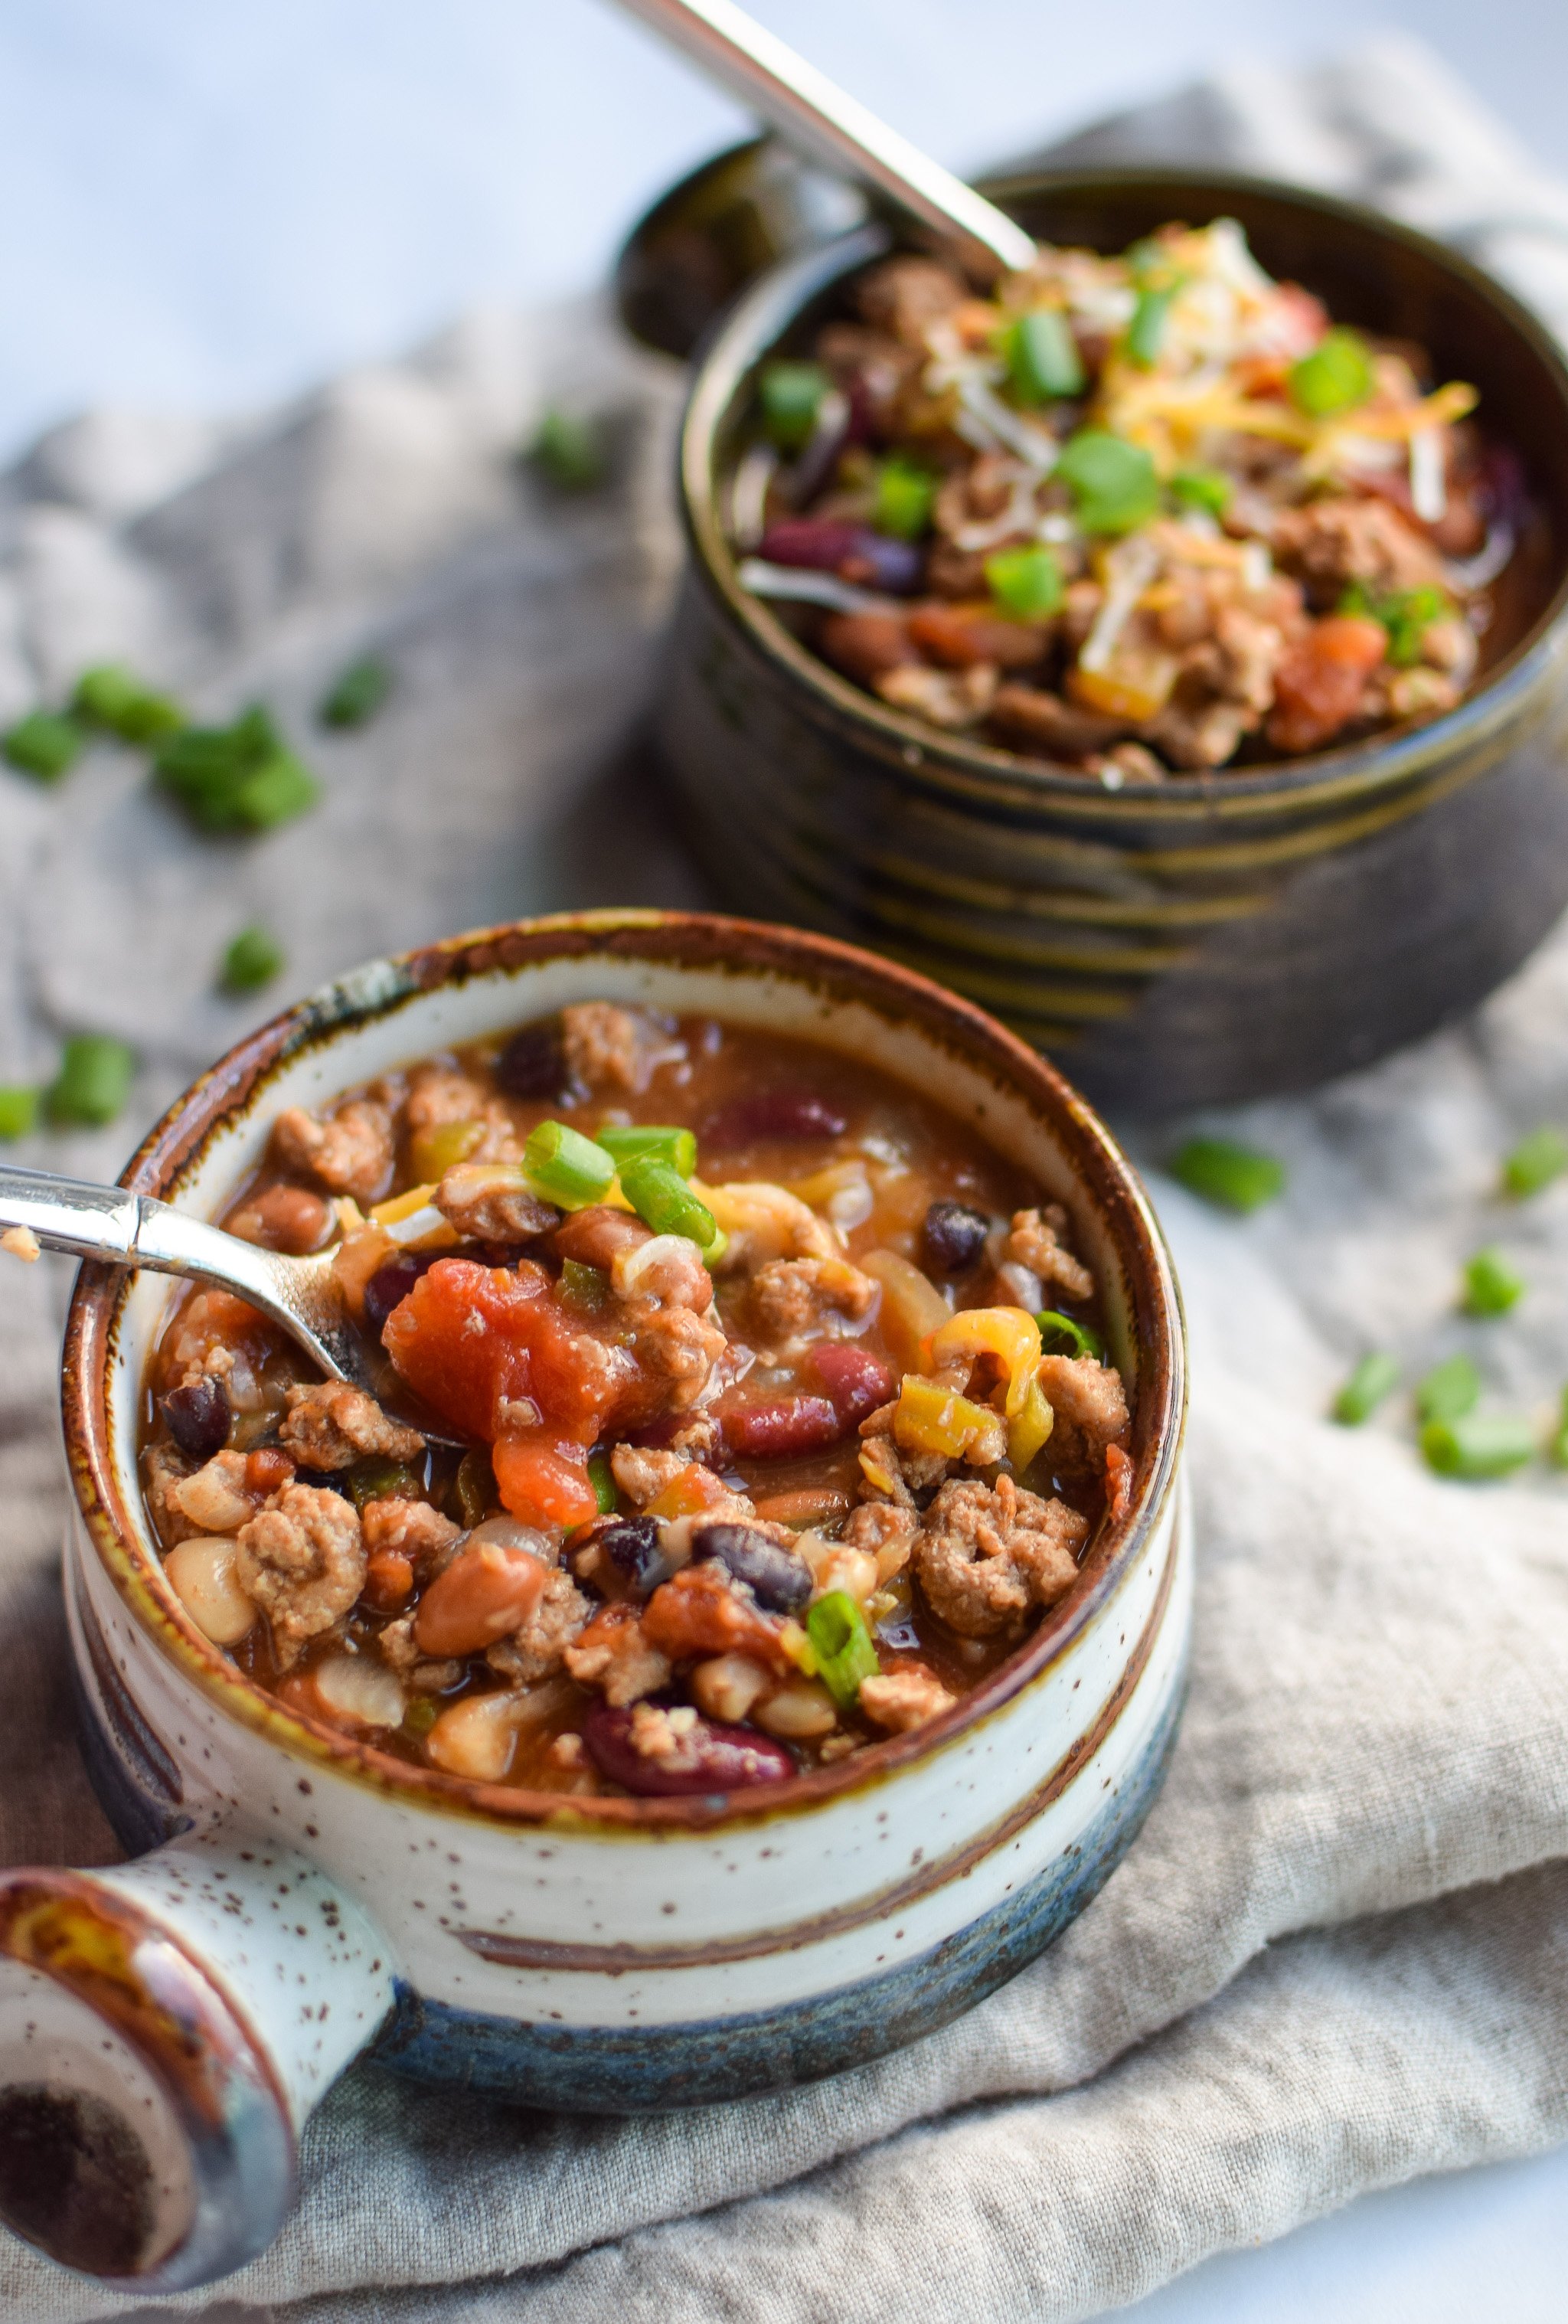 Easy Slow Cooker 4-Bean Turkey Chili - Project Meal Plan